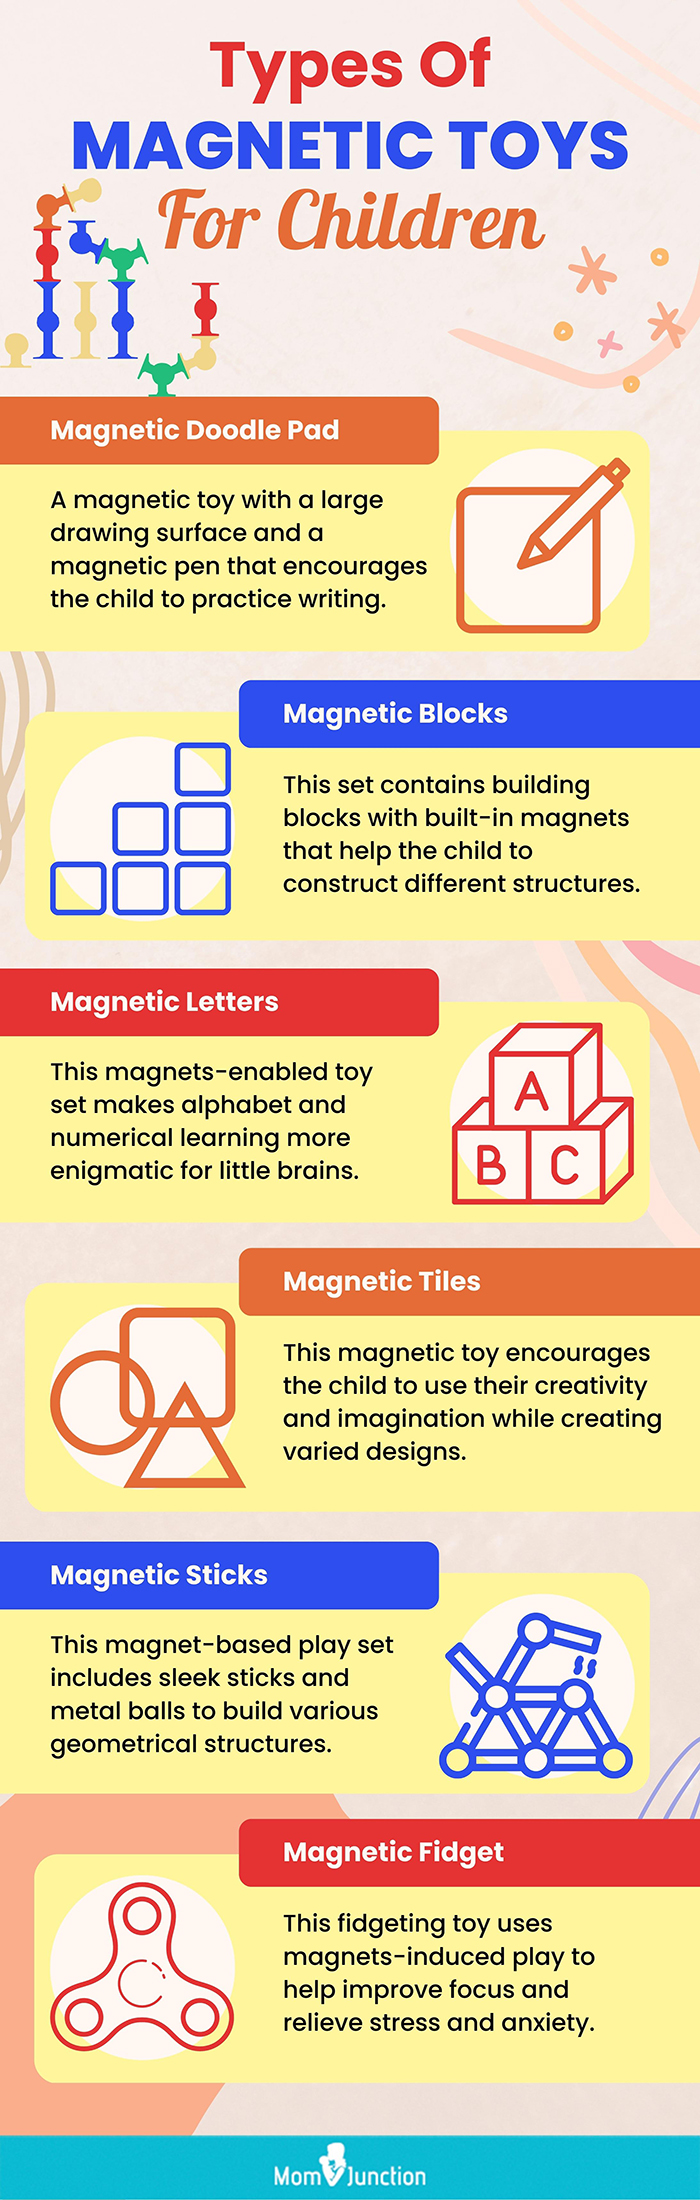 Types Of Magnetic Toys For Children (infographic)